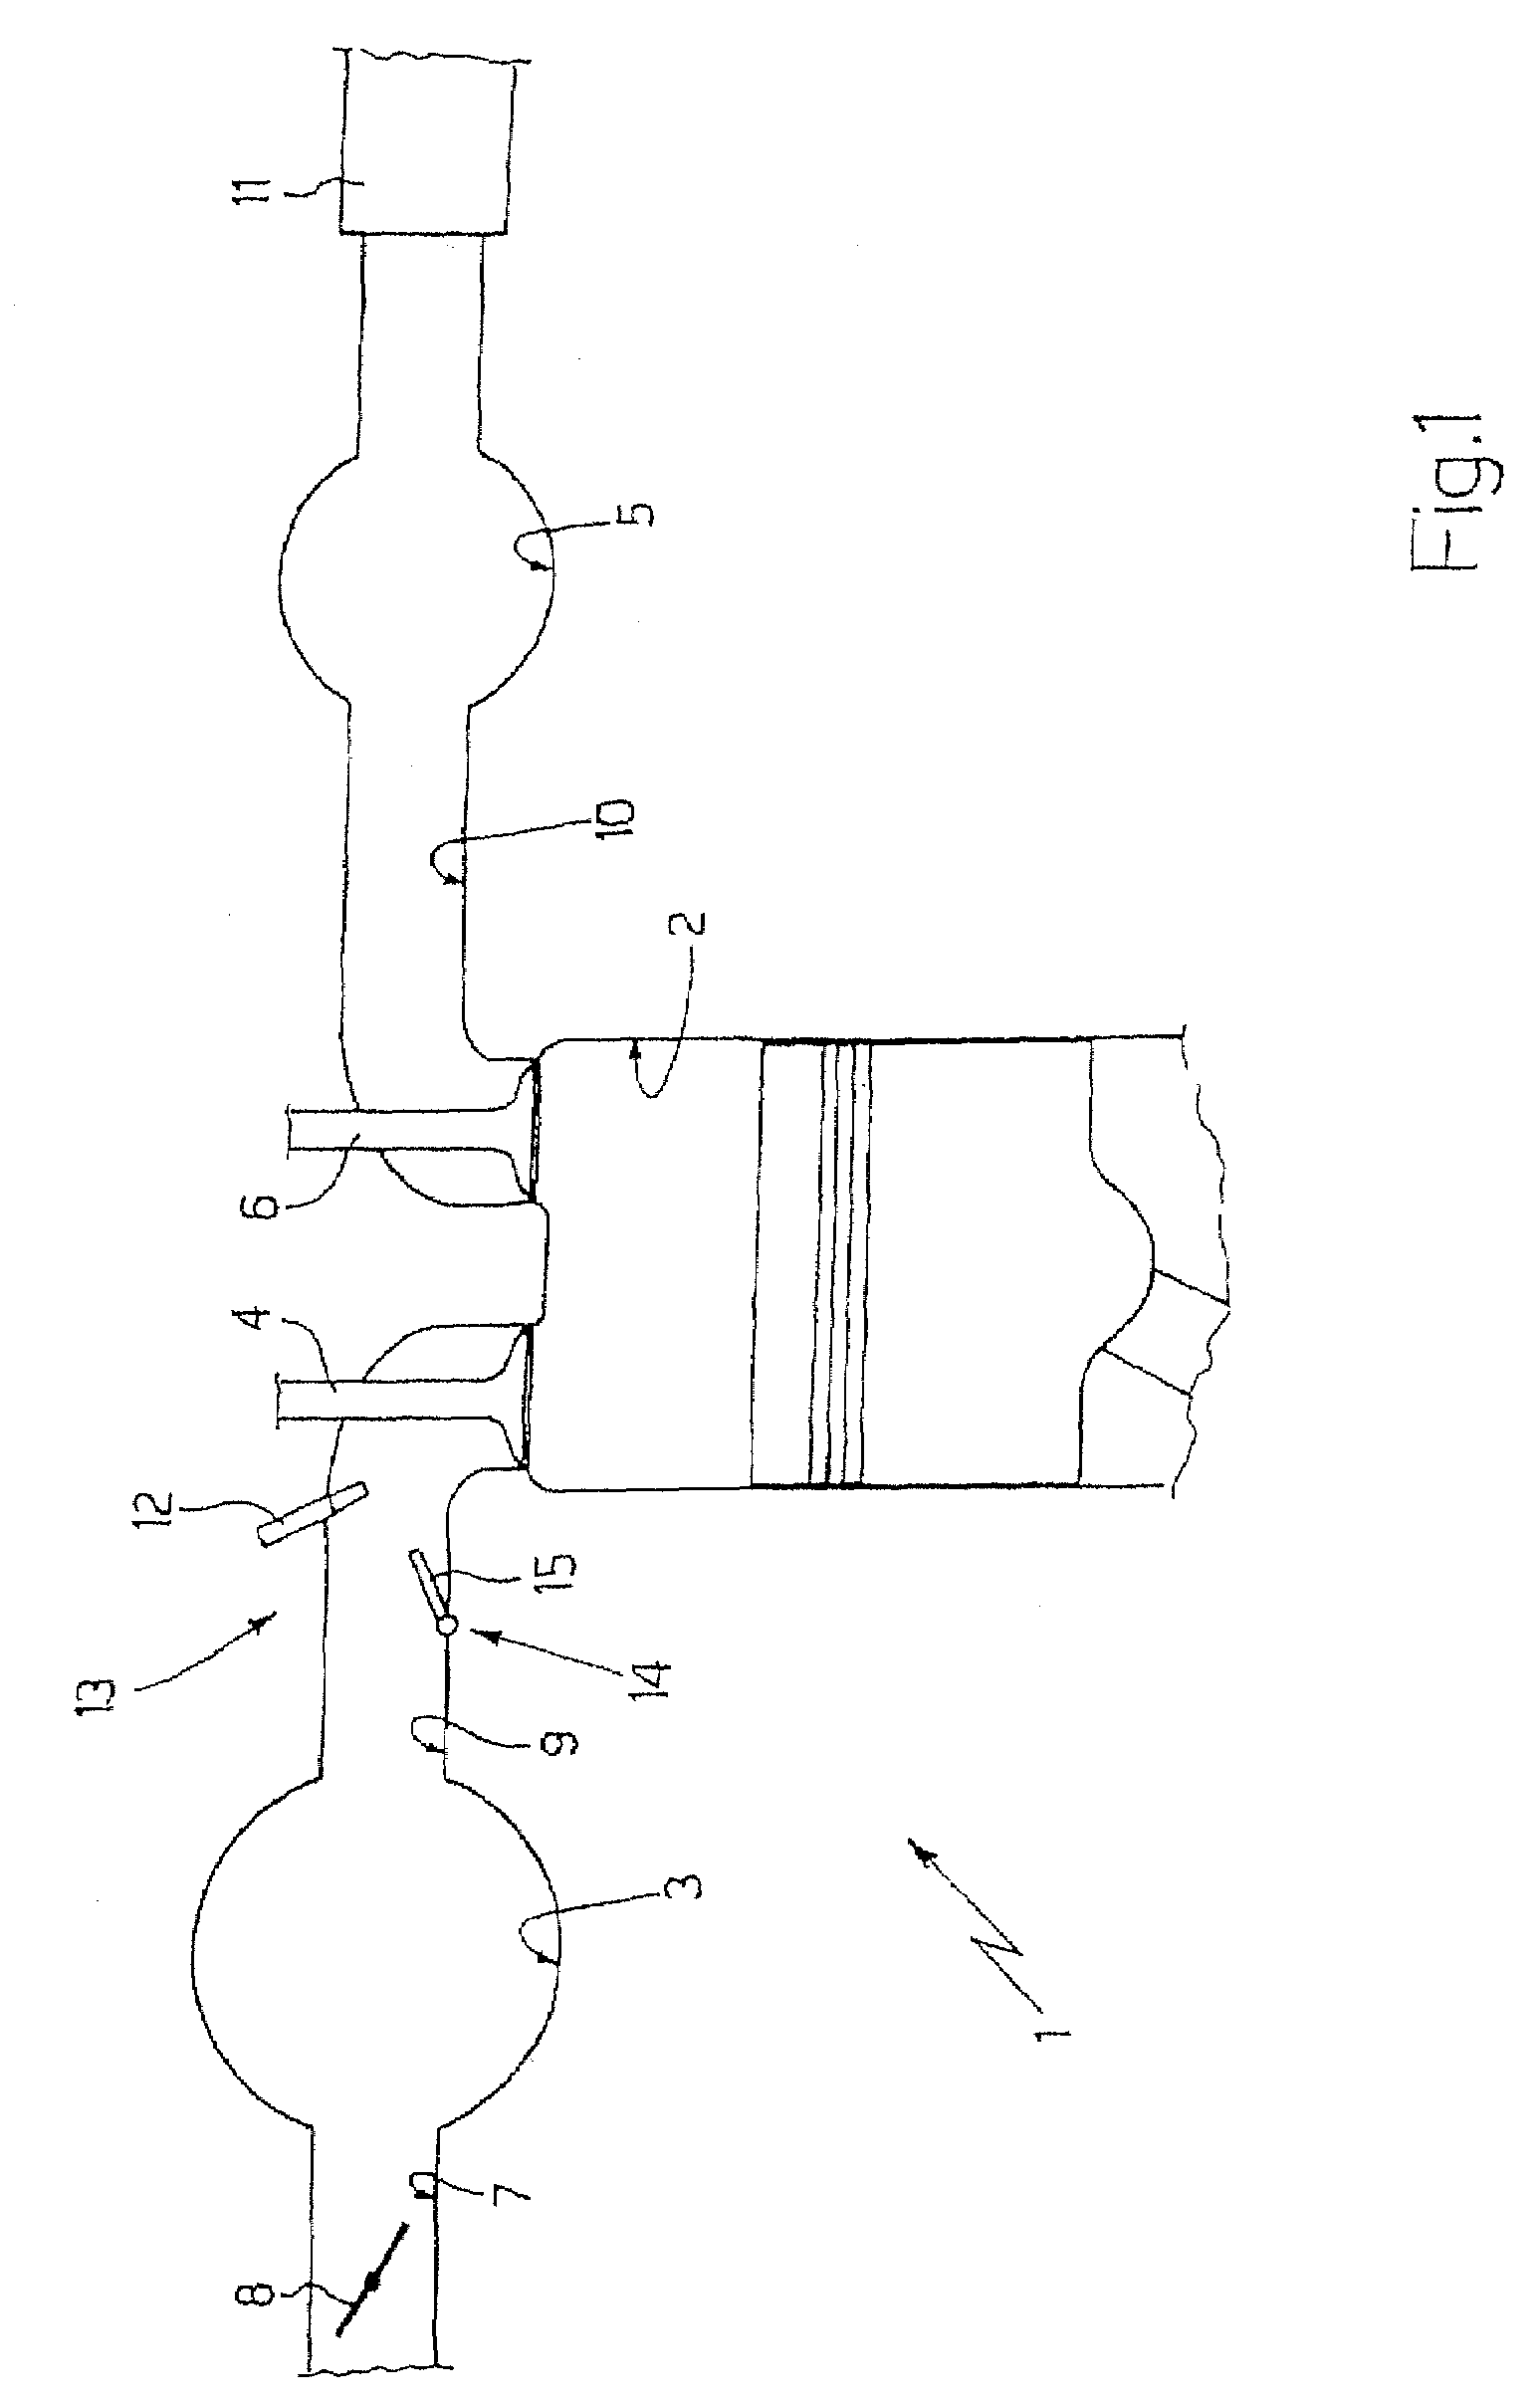 Variable-geometry intake manifold for an internal-combustion engine